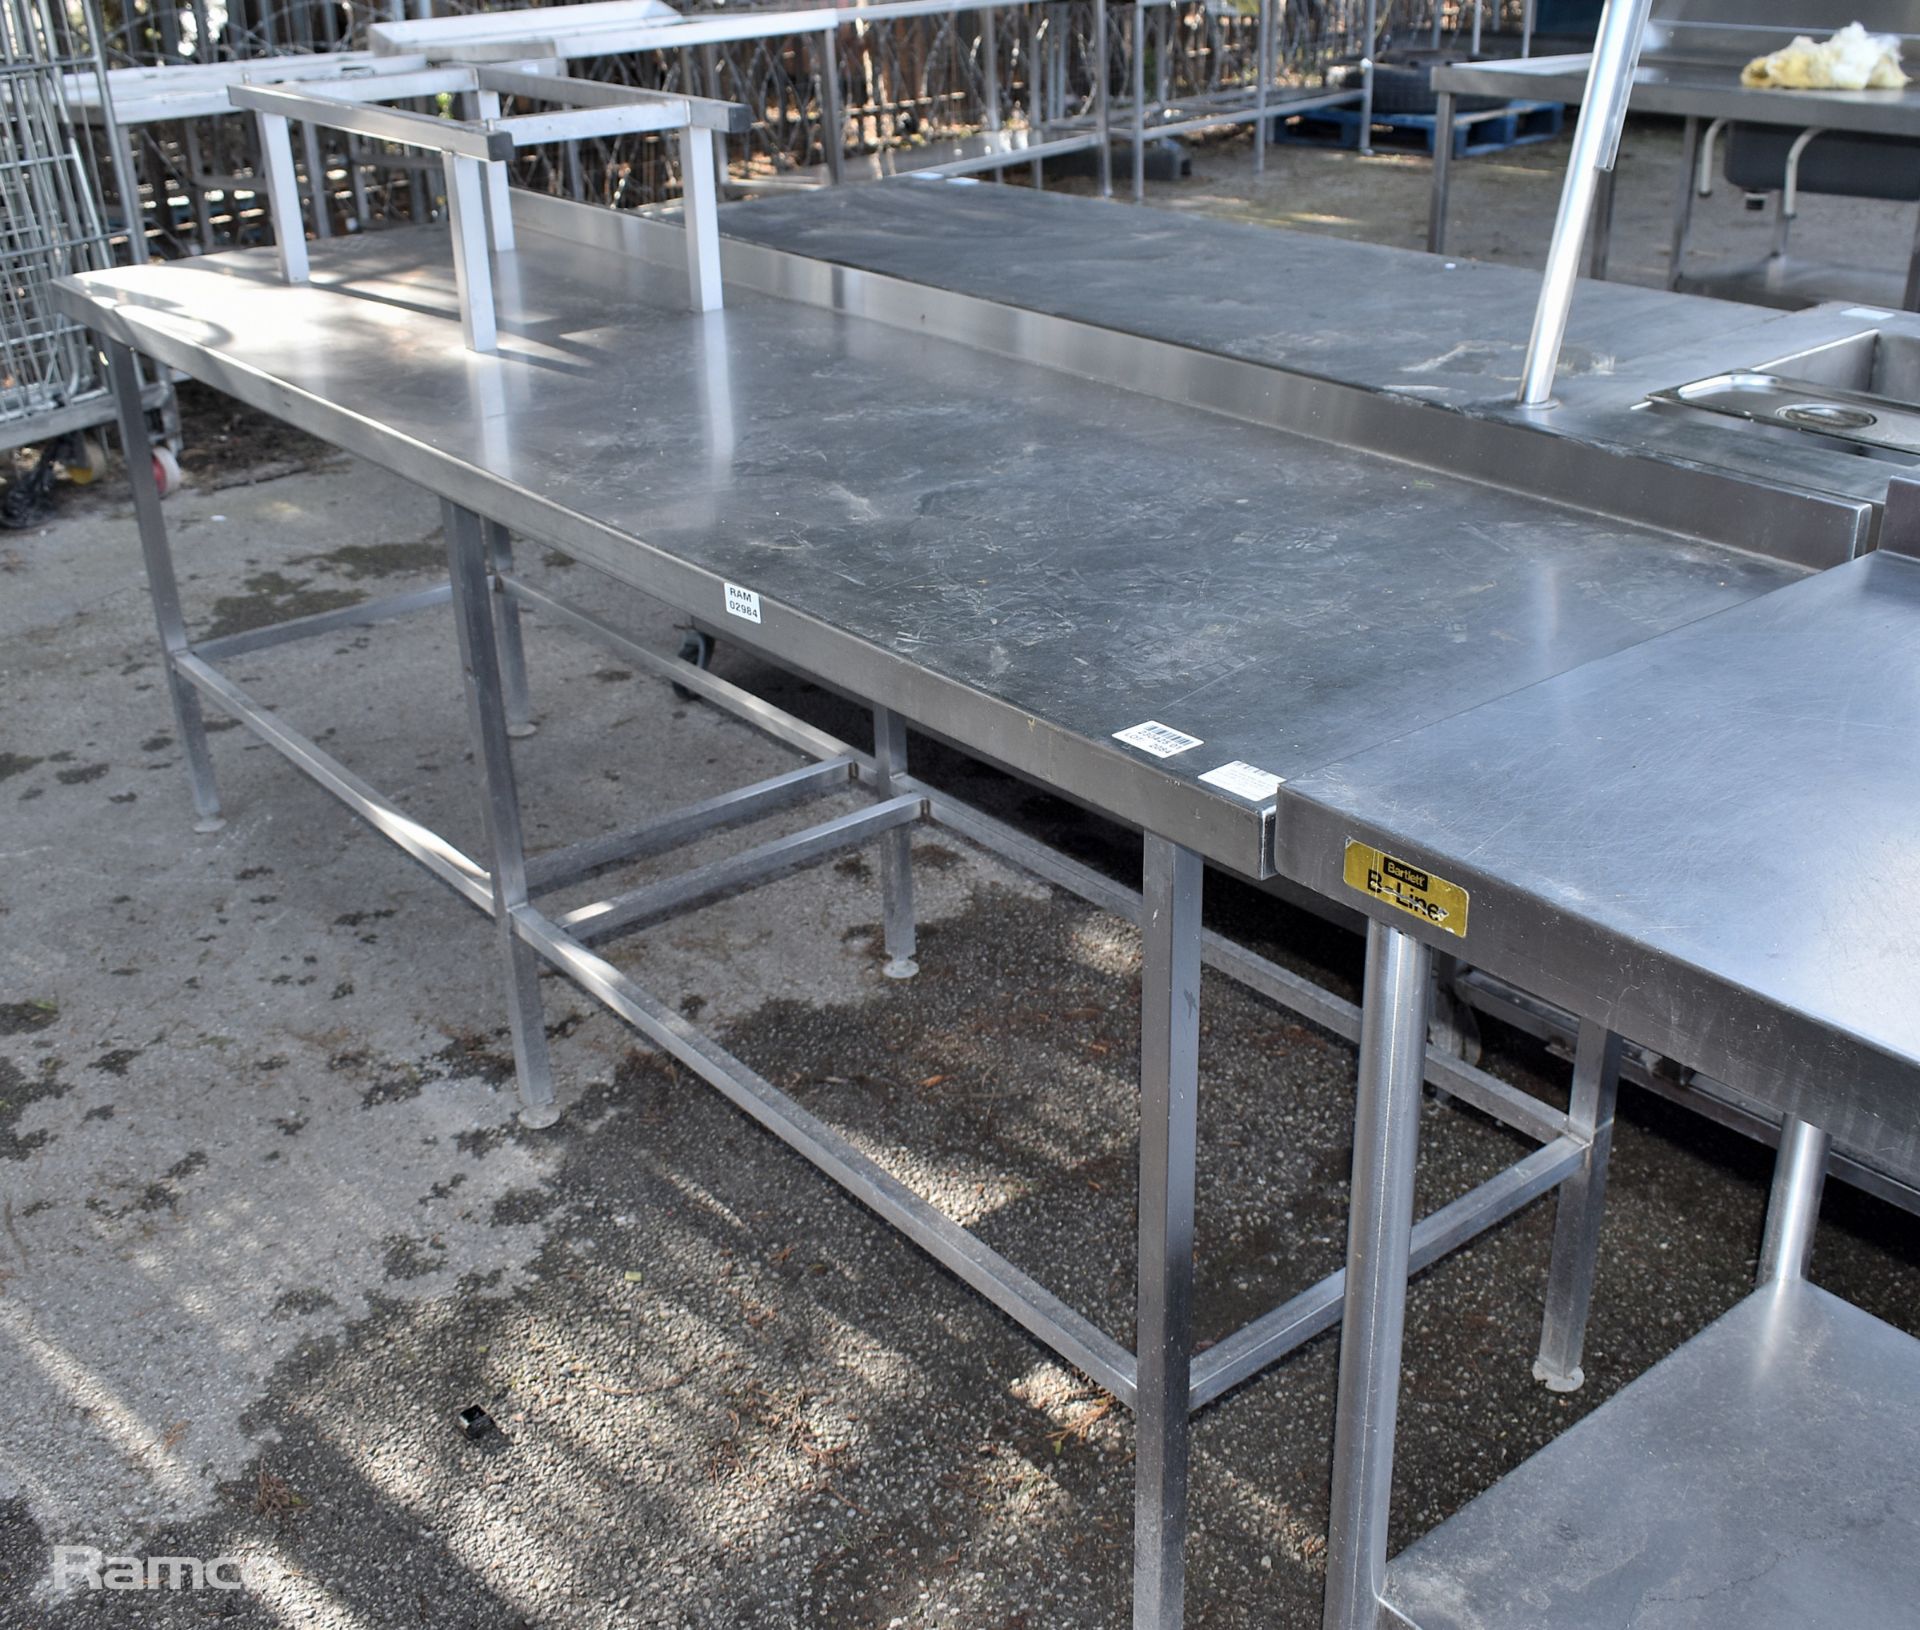 Stainless steel table with upstand and bracket for appliances - L 240 x W 70 x H 110cm - Image 4 of 4